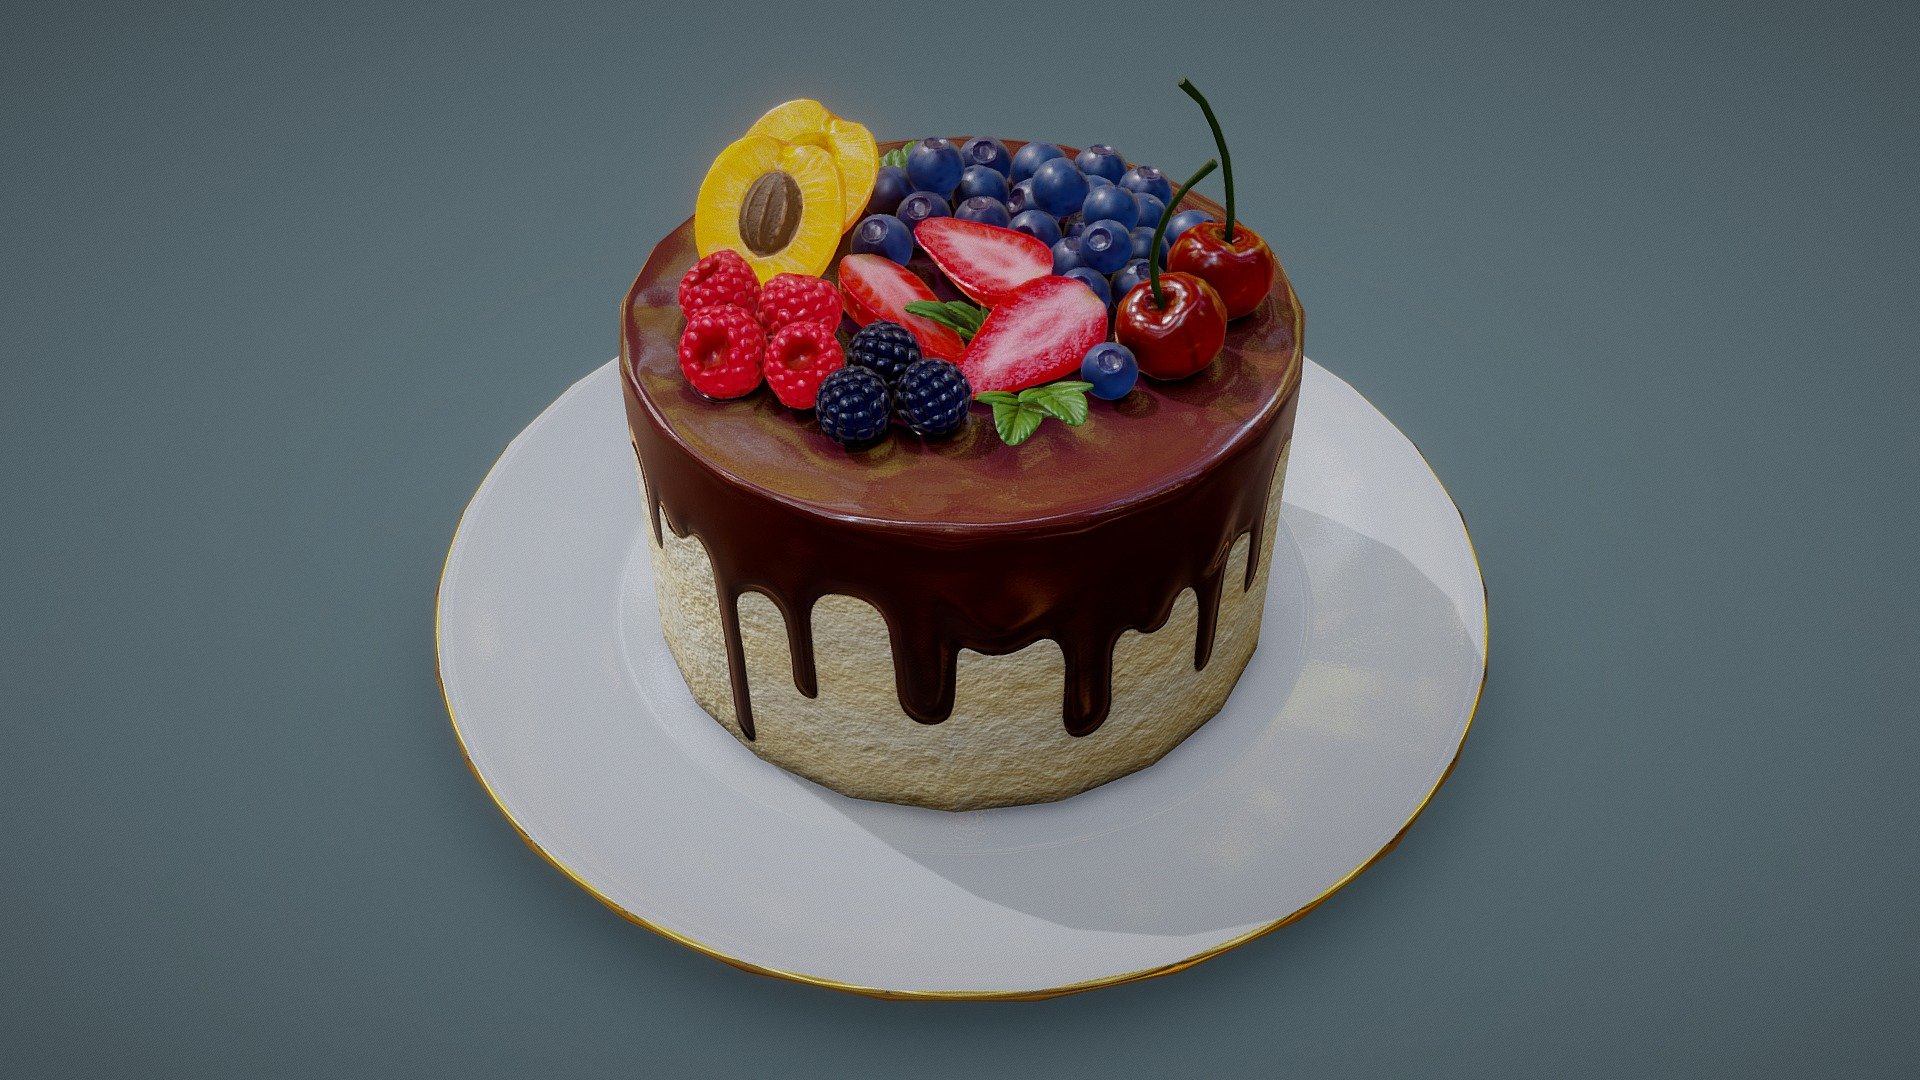 Lowpoly stylized cake model made for the Sketchfab Dessert Challenge - Rich Berry Cake - 3D model by F3dorov 3d model